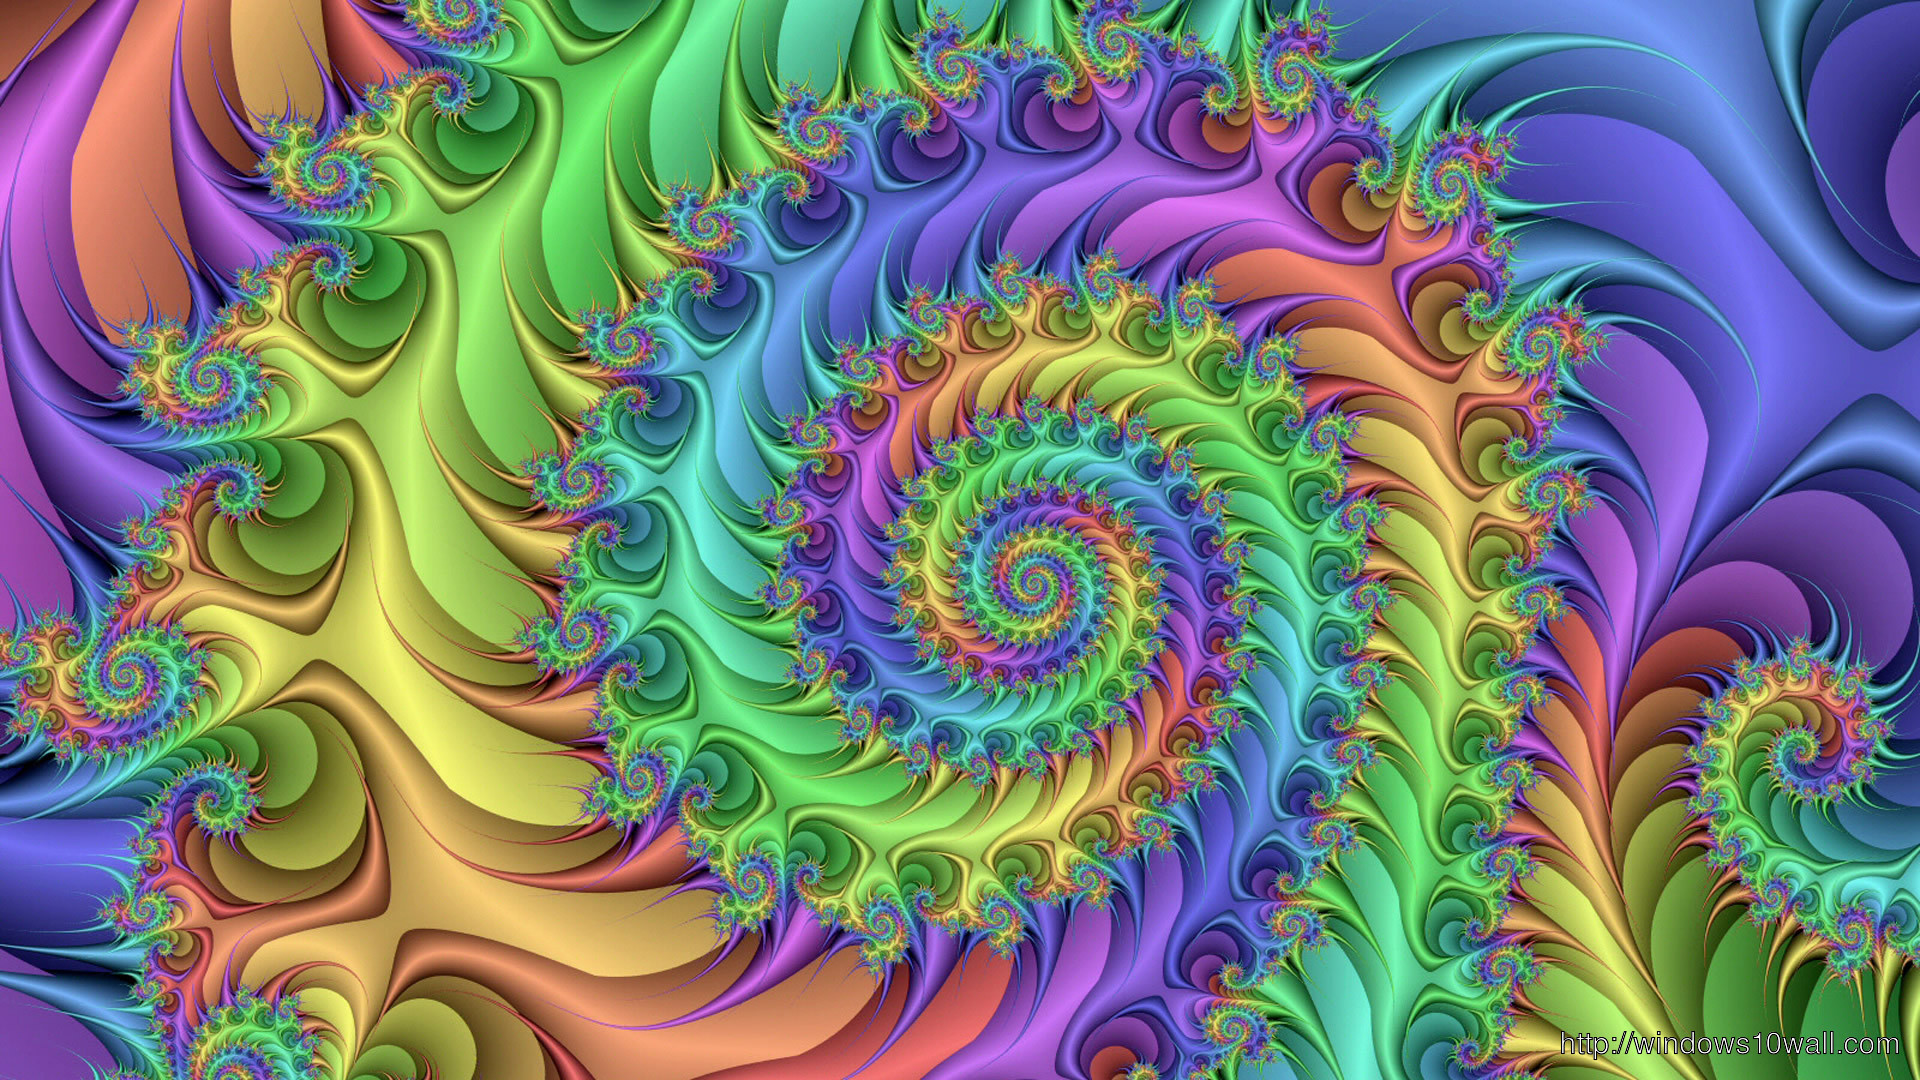 Cool Backgrounds : Trippy & psychedelic Wallpapers